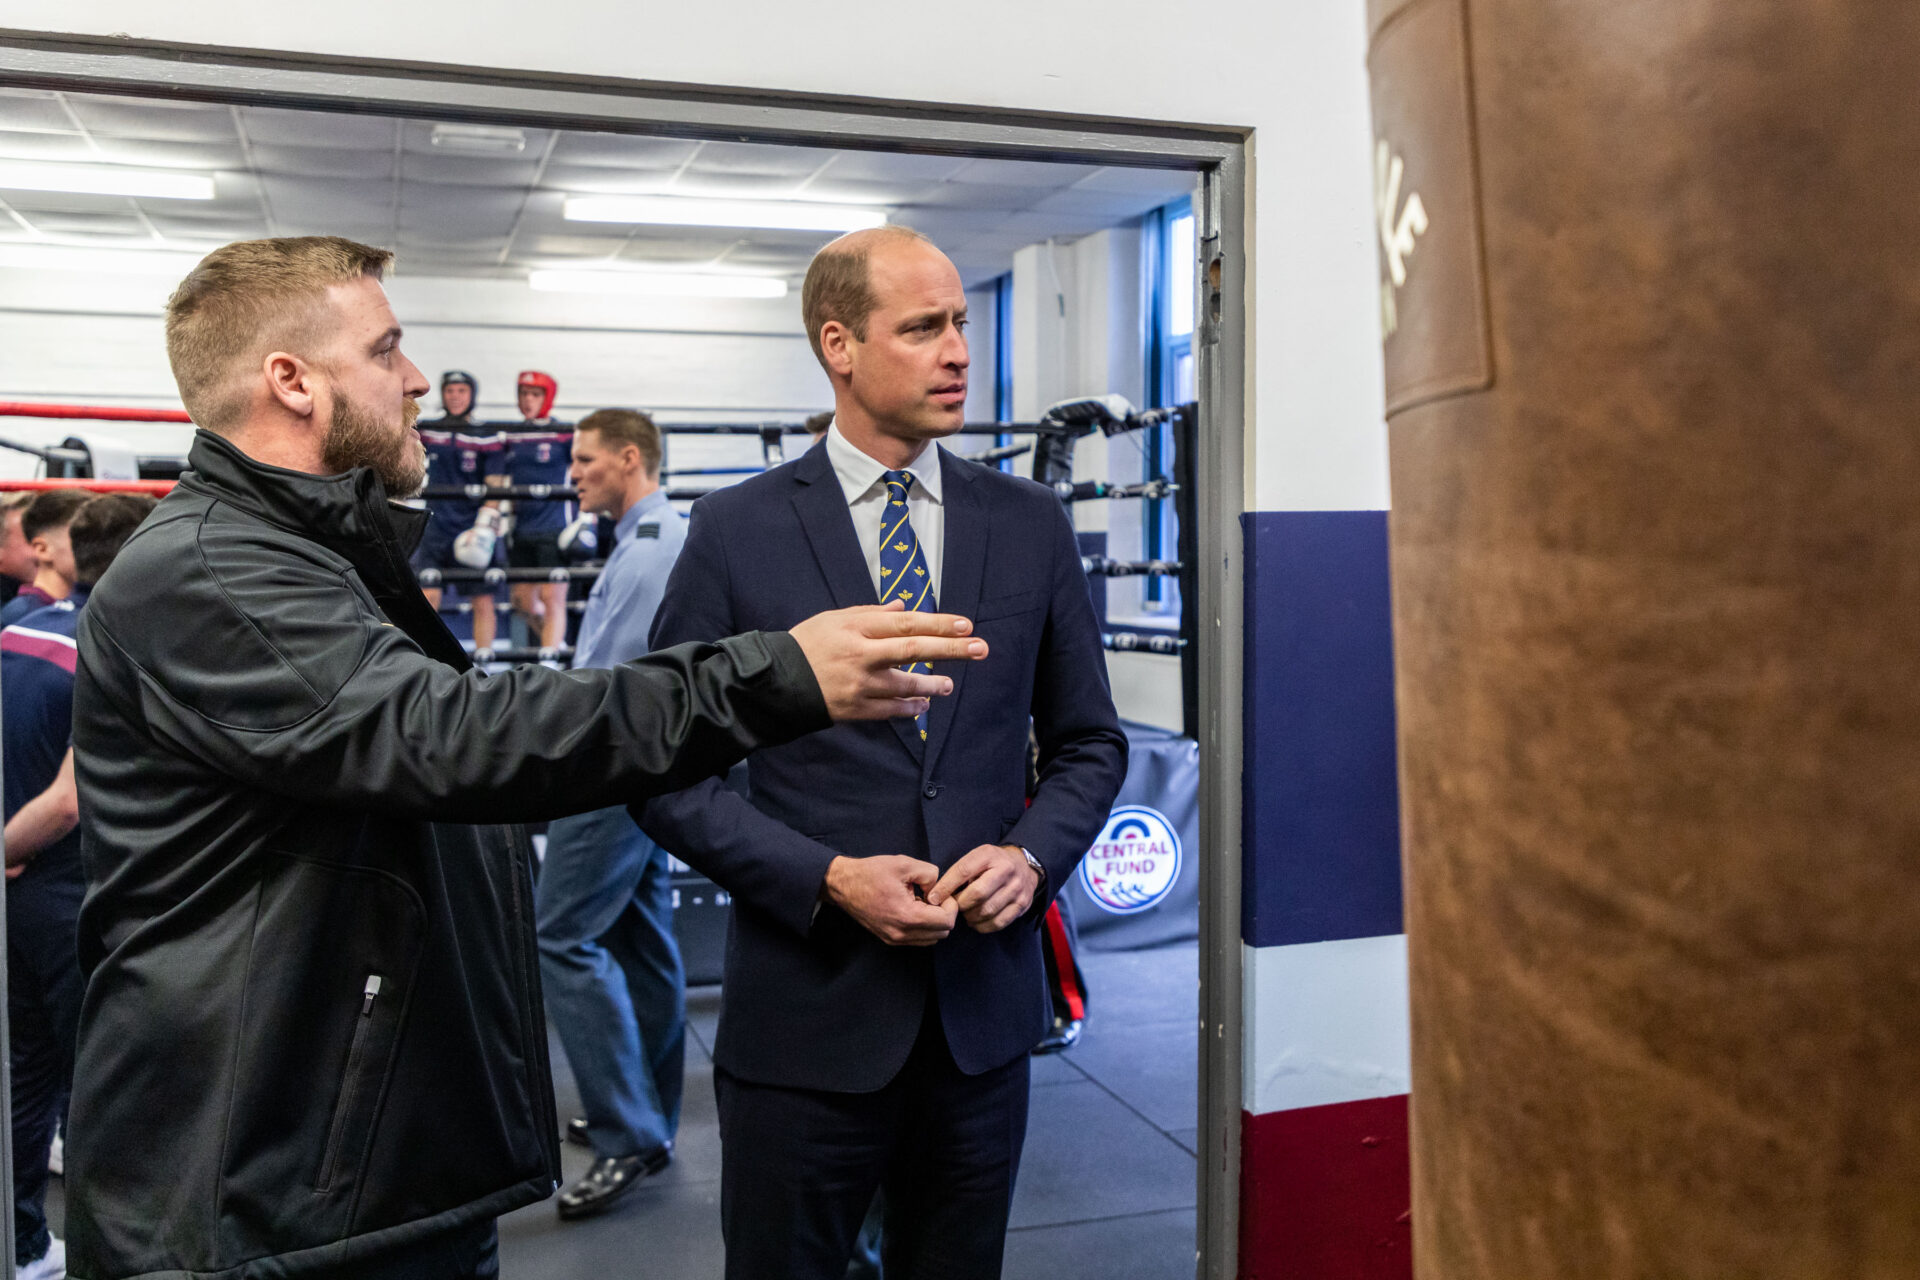 His Royal Highness Prince of Wales visits RAF Coningsby Boxing Club